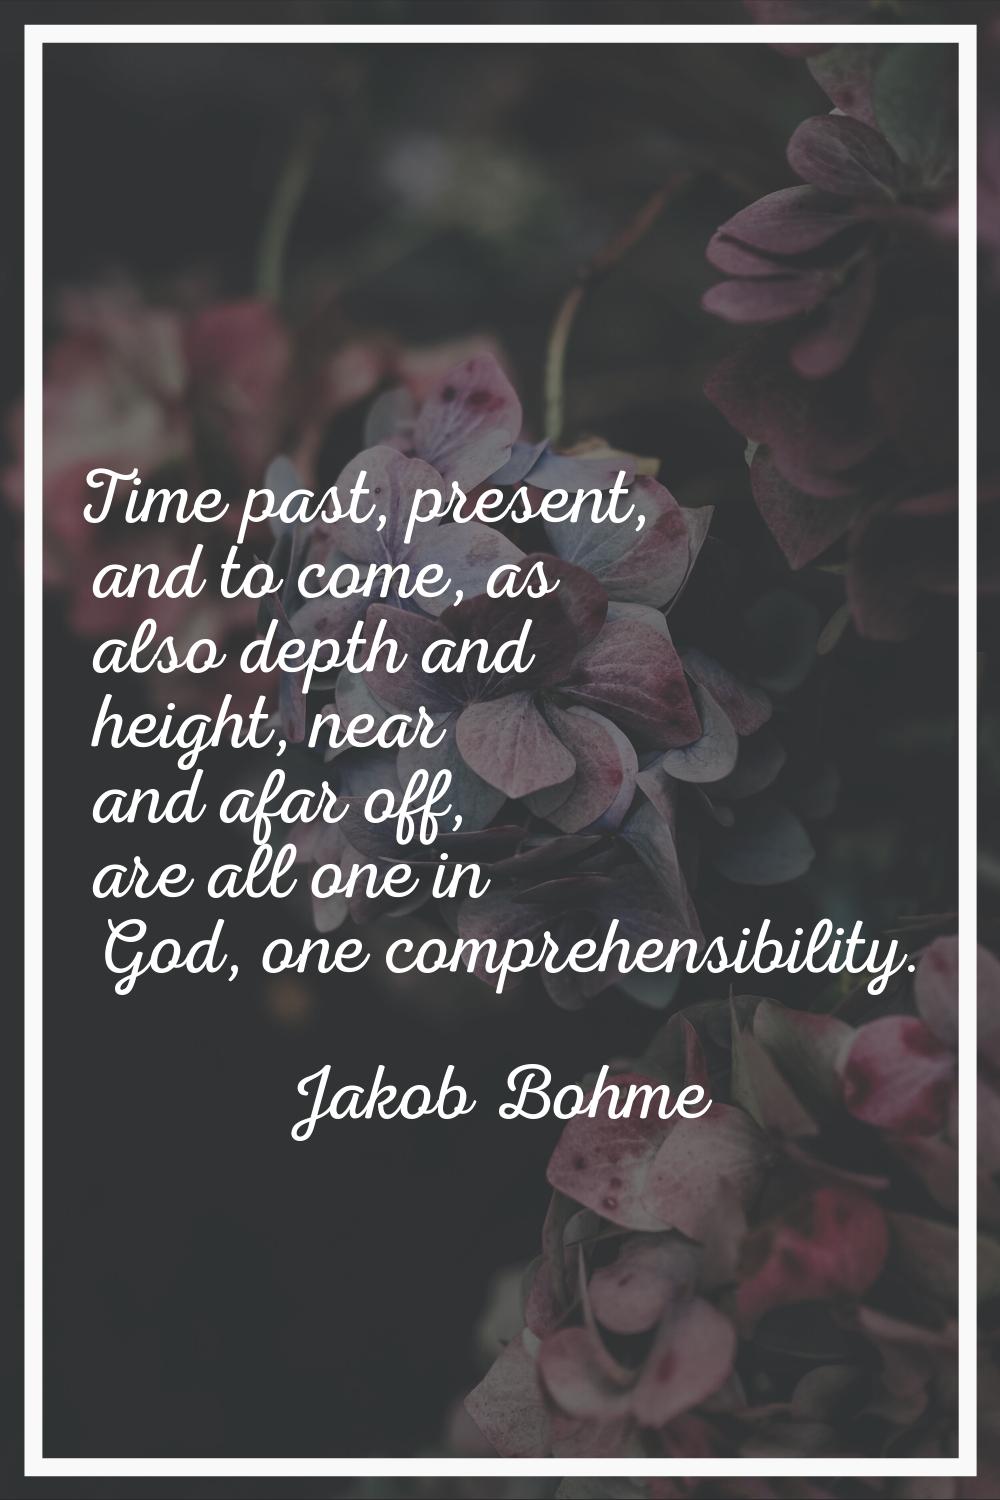 Time past, present, and to come, as also depth and height, near and afar off, are all one in God, o